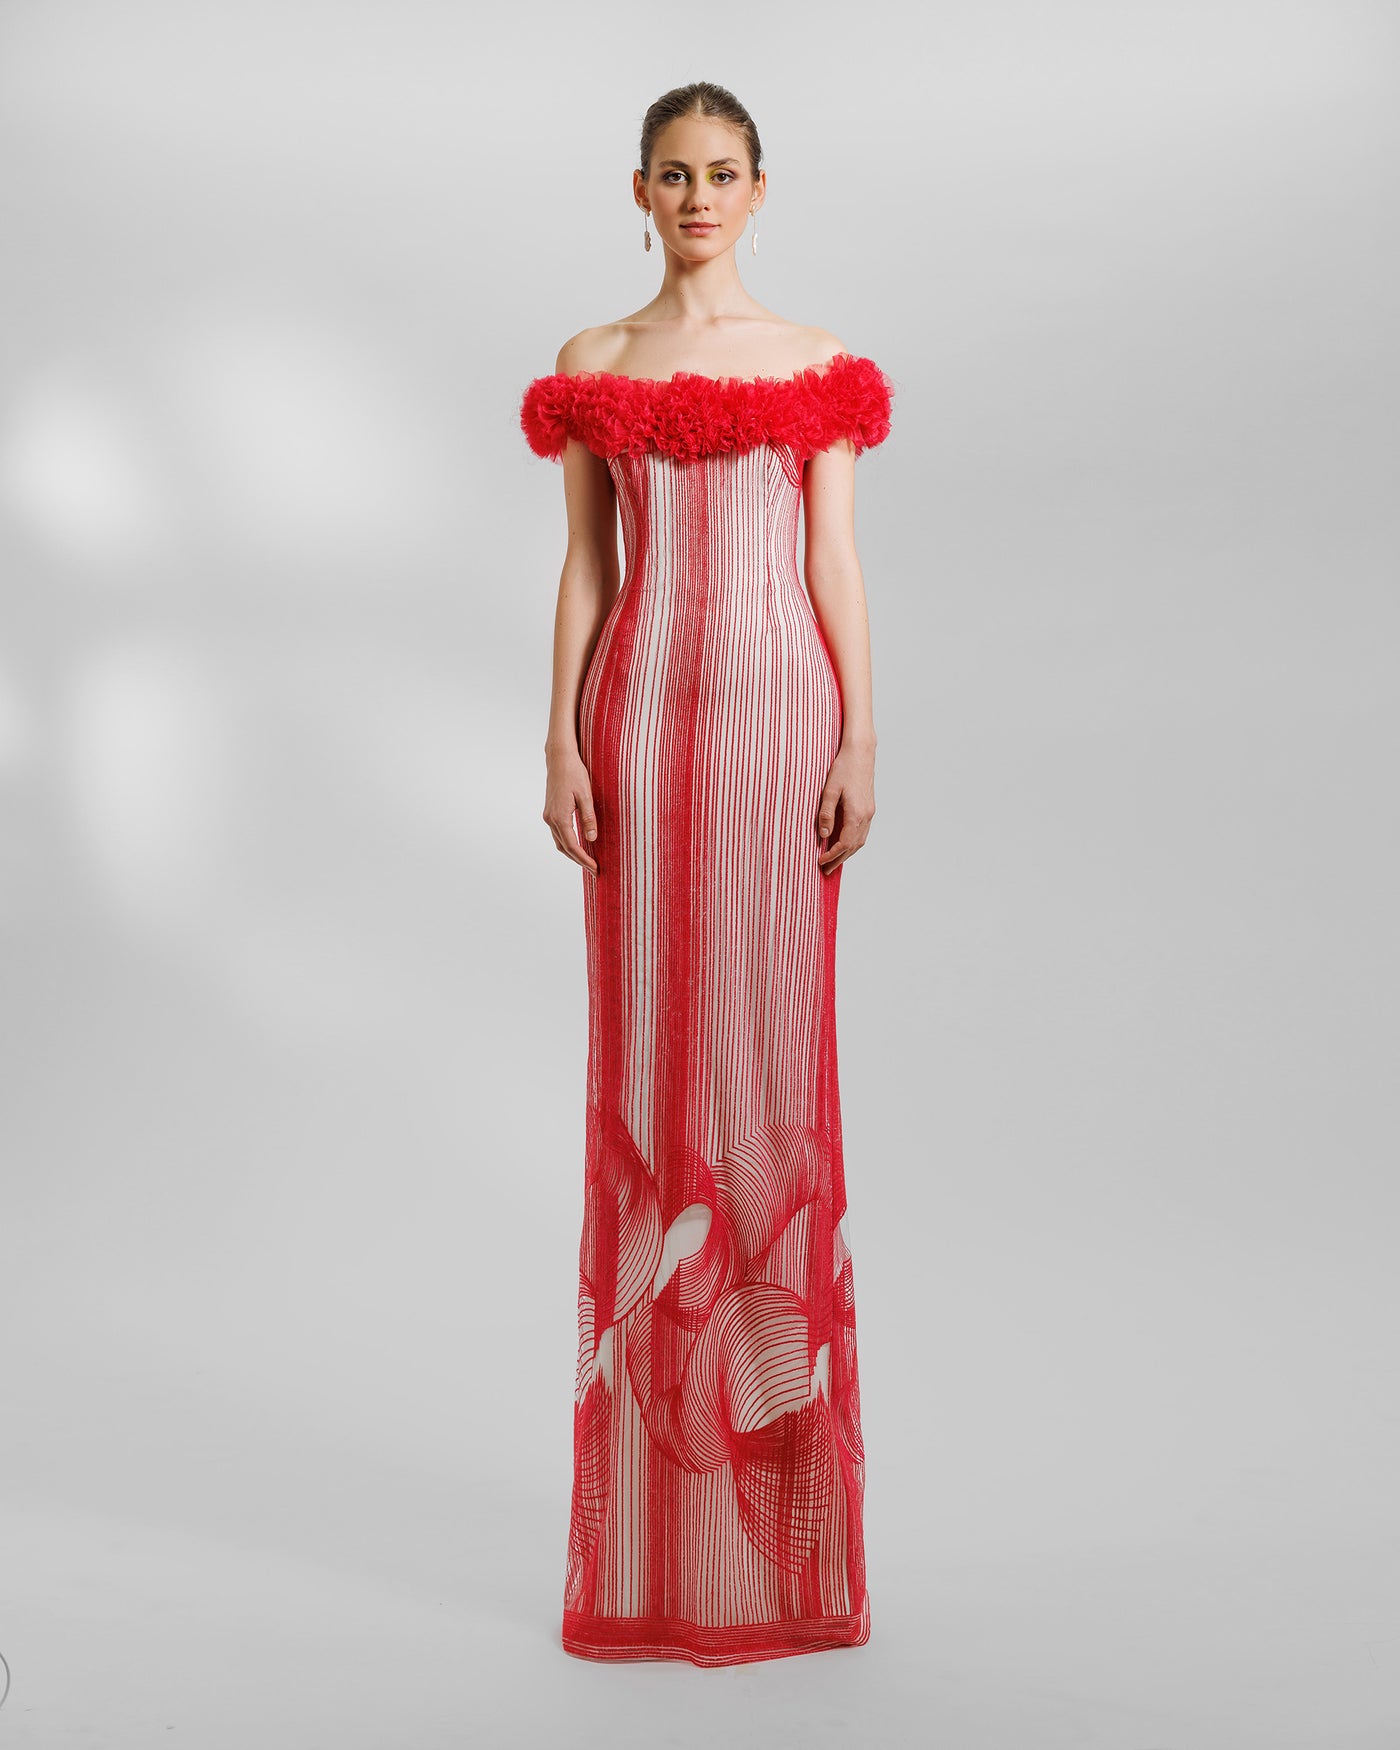 An off-the-shoulders slim-cut red evening dress with rushed organza on the neckline and an open slit at the back.